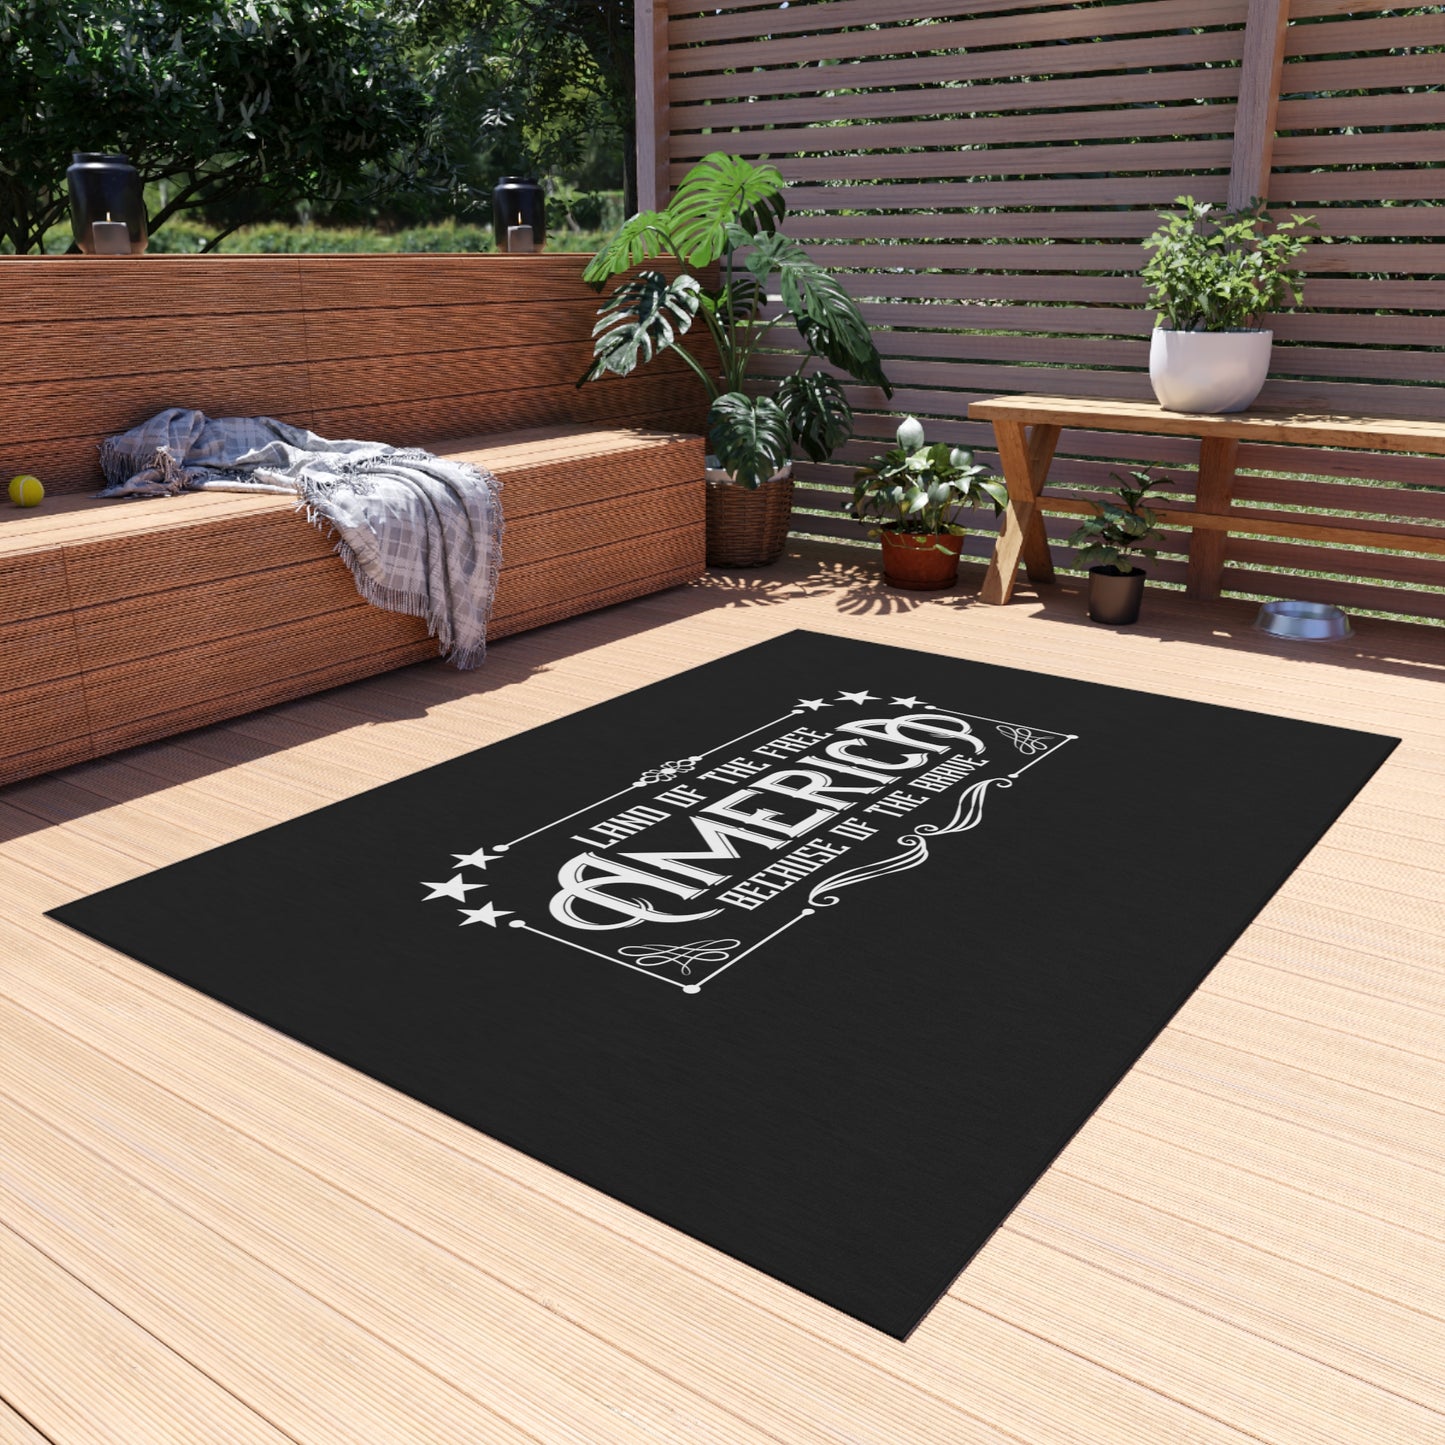 Land of the Free a USA Patriots Greatest Outdoor Rug